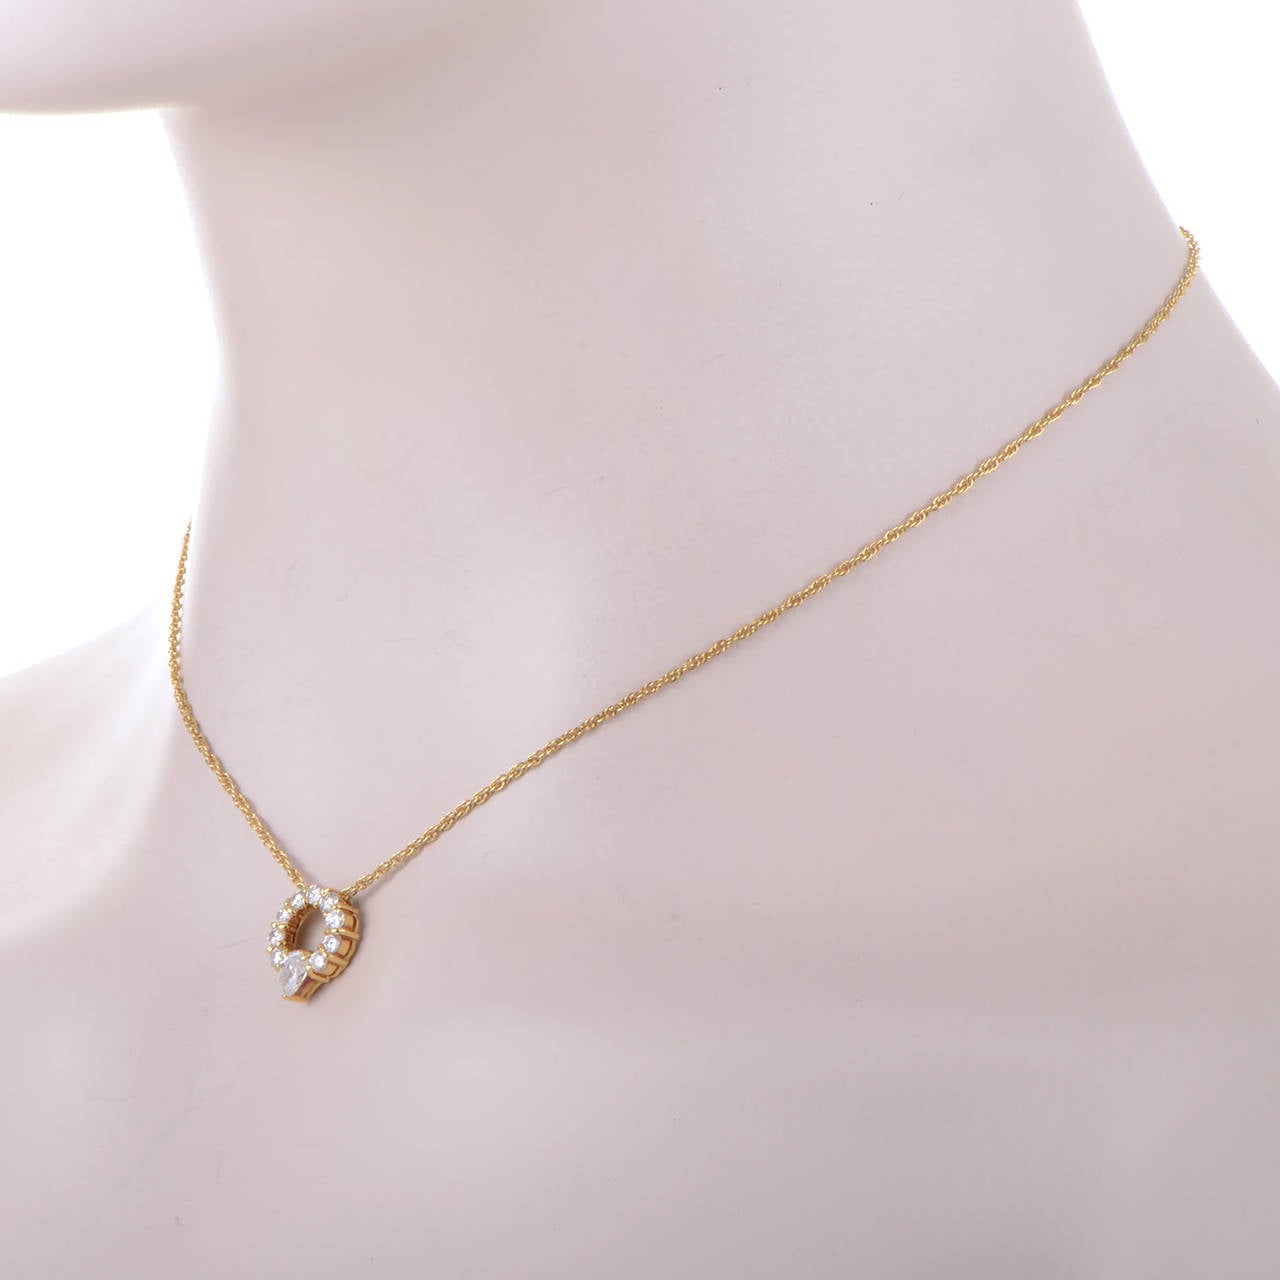 Golden and glorious, this glamorous necklace from Celine is absolutely stunning! The necklace is made of 18K yellow gold and features a delicate .85 carat diamond set pendant.
Approximate Dimensions: Drop of the Necklace: 8.00